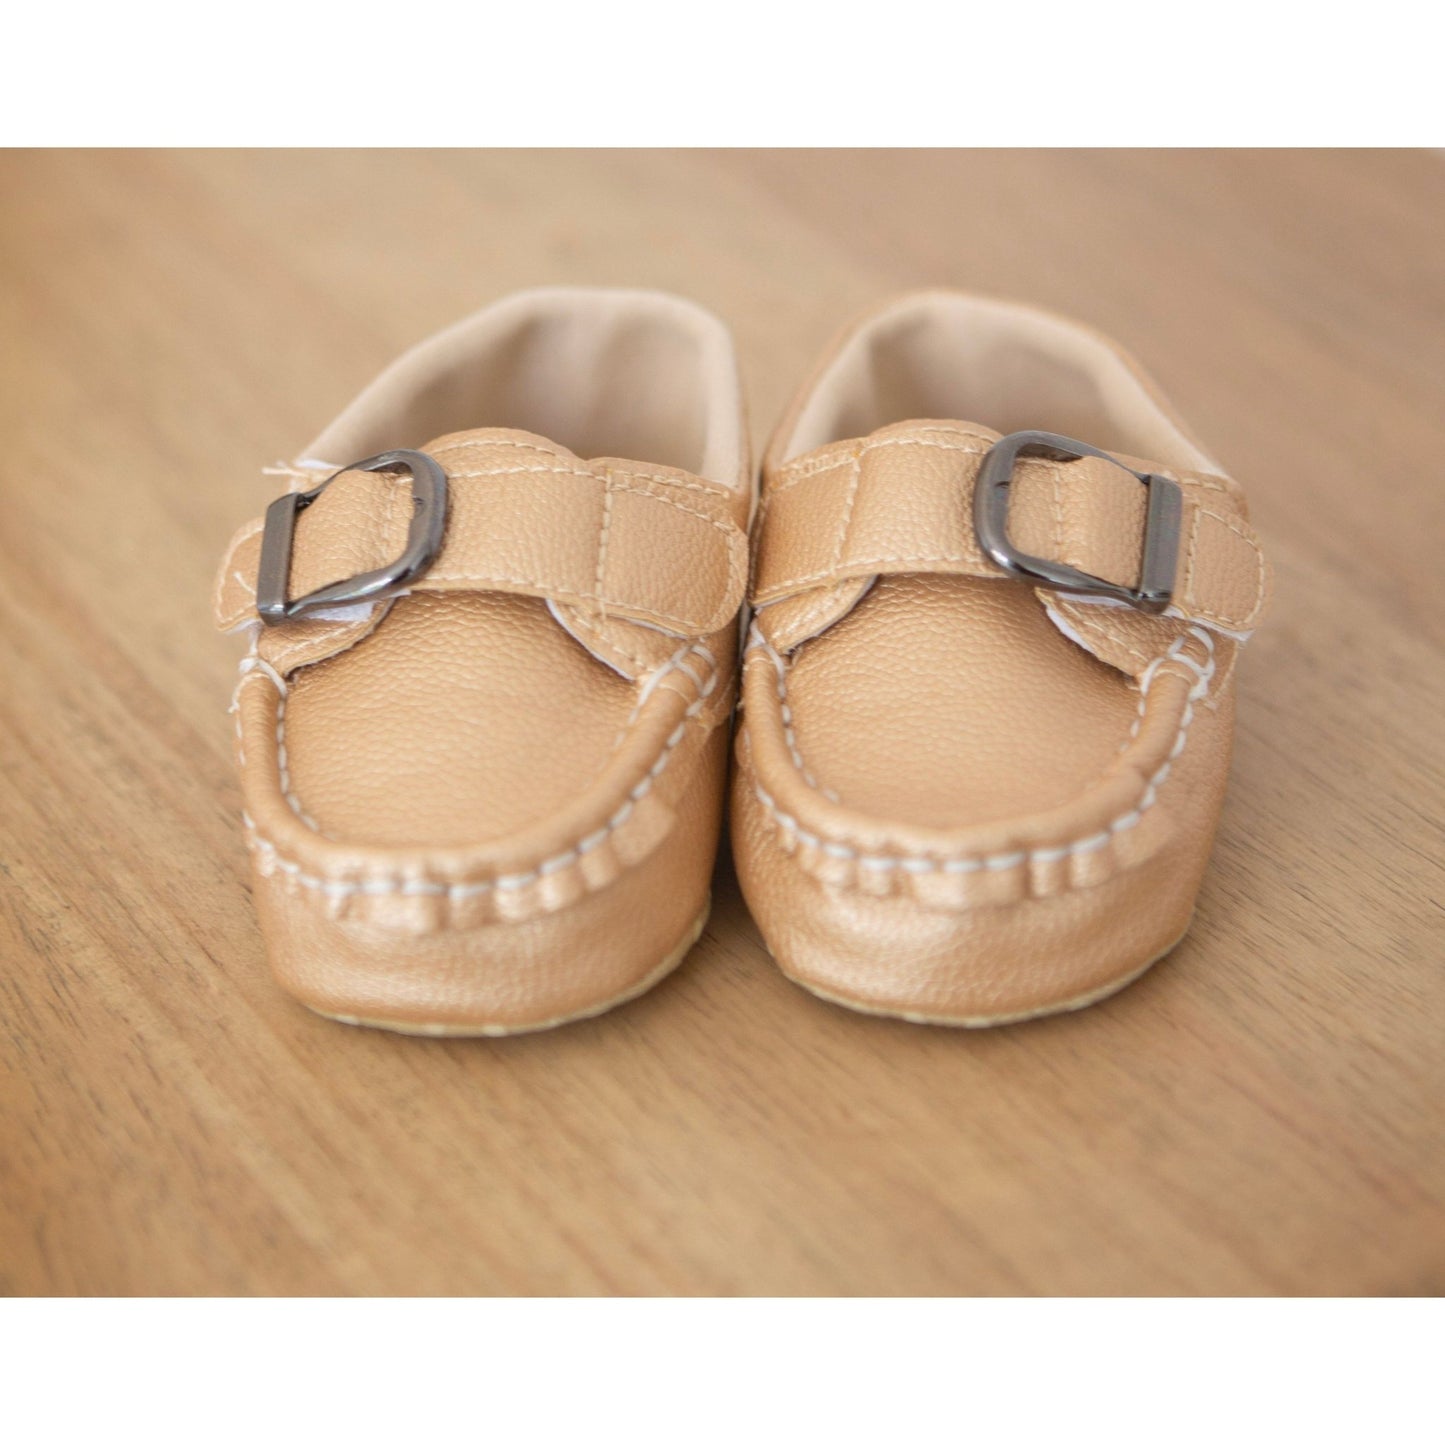 Baby Shoes - Baby Boy Loafers - Cheerful Lane